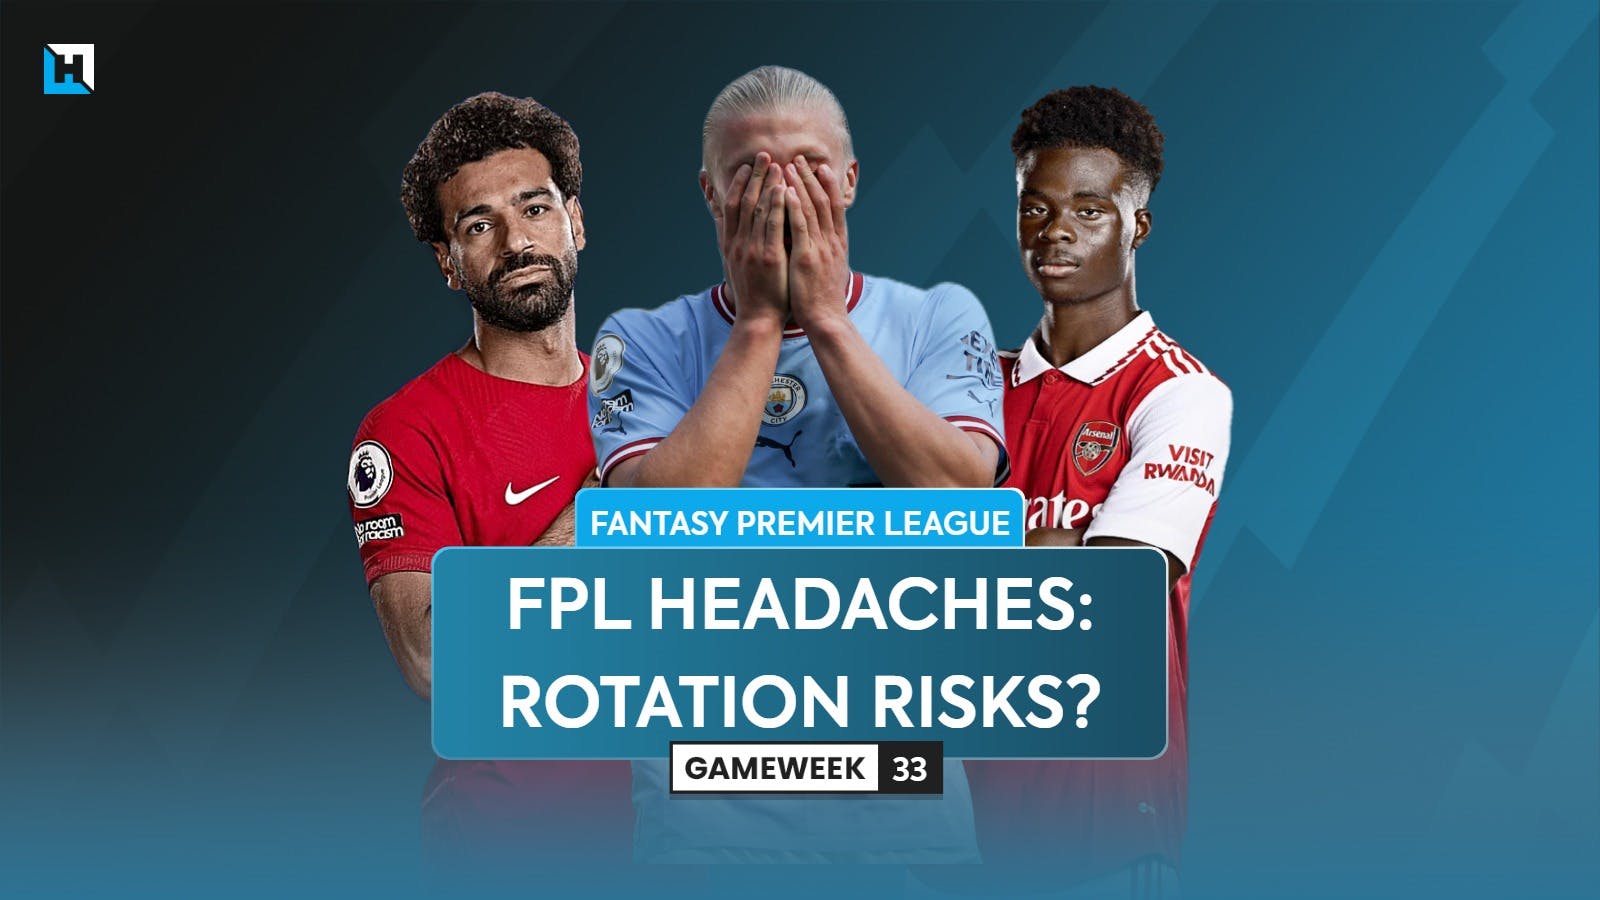 FPL headaches: Will Haaland, Salah and others be rested in Gameweek 33?